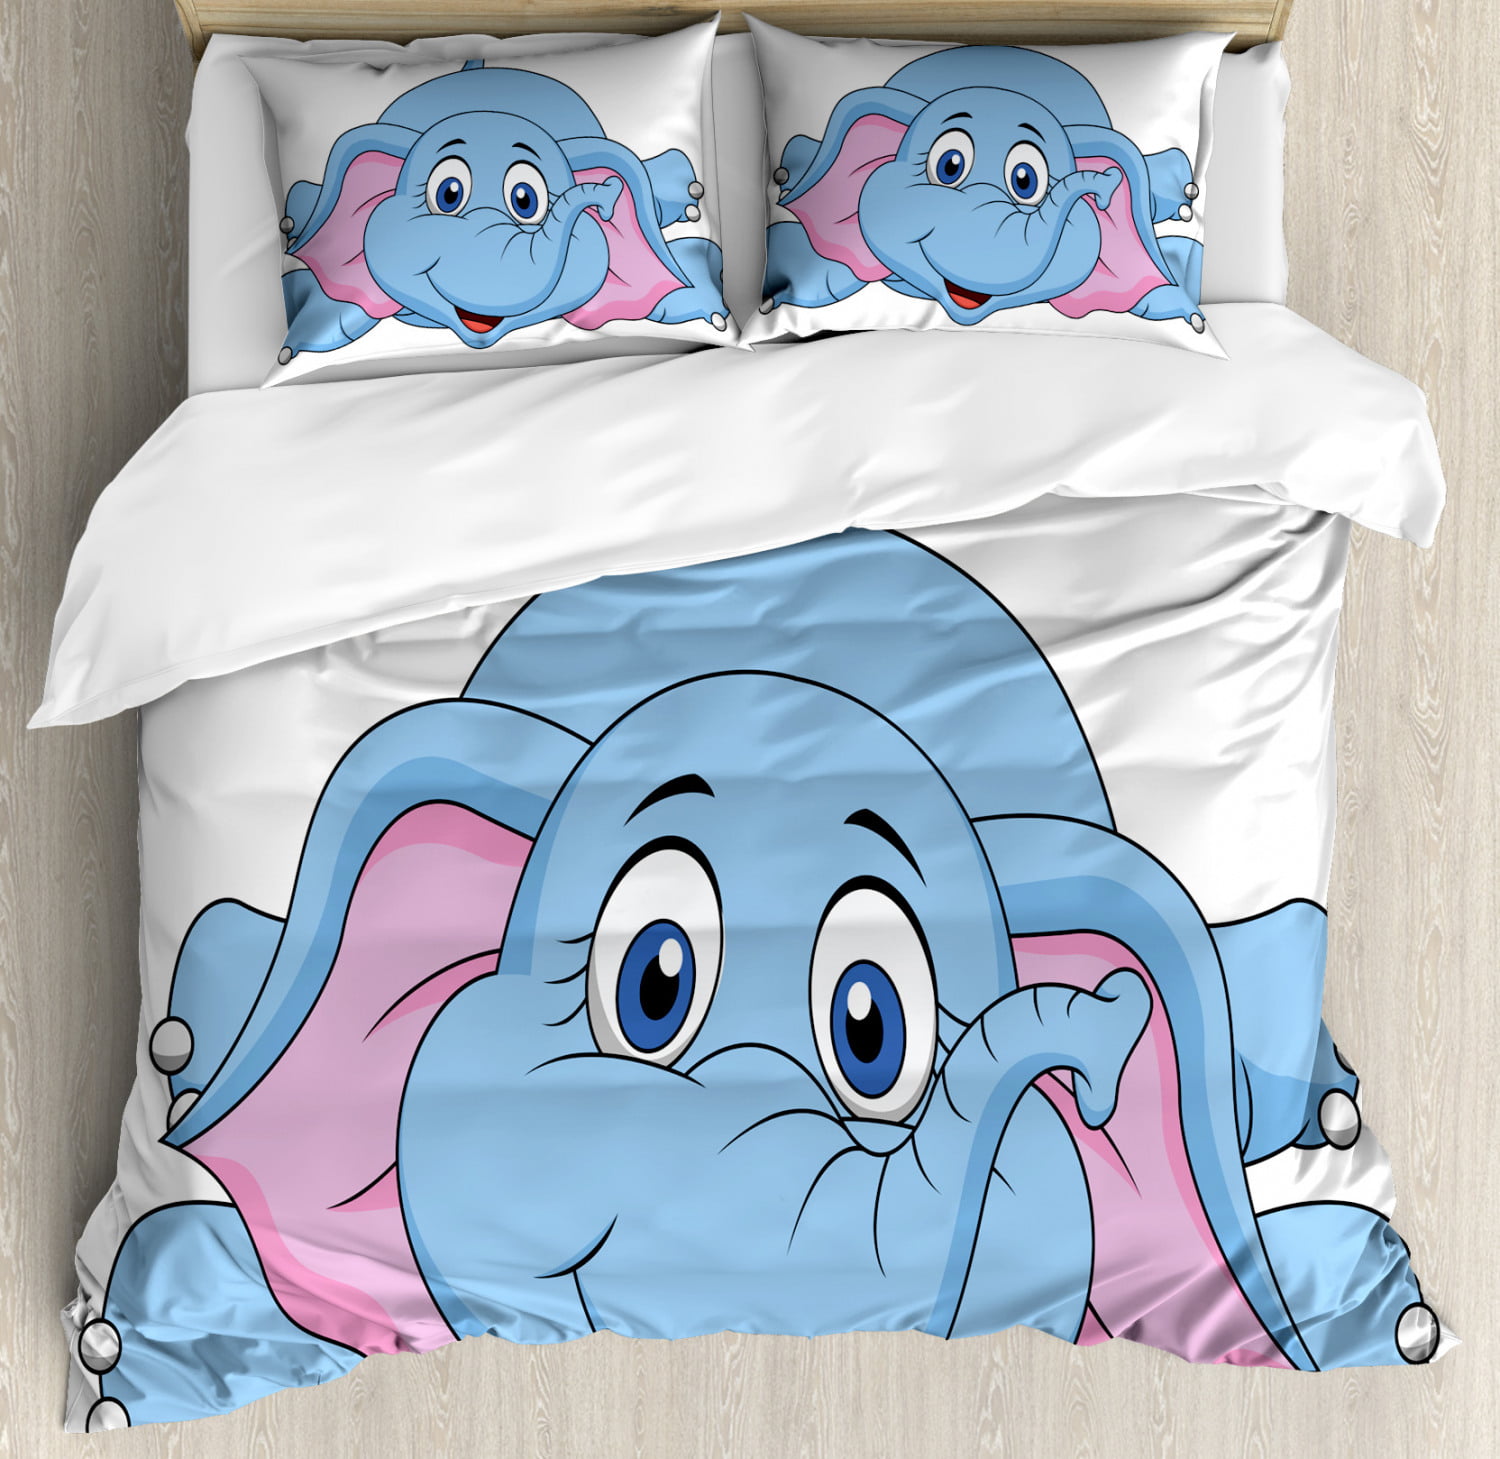 Elephant print king size bed sheet with 2 zipper pillow cover set 100 % cotton 